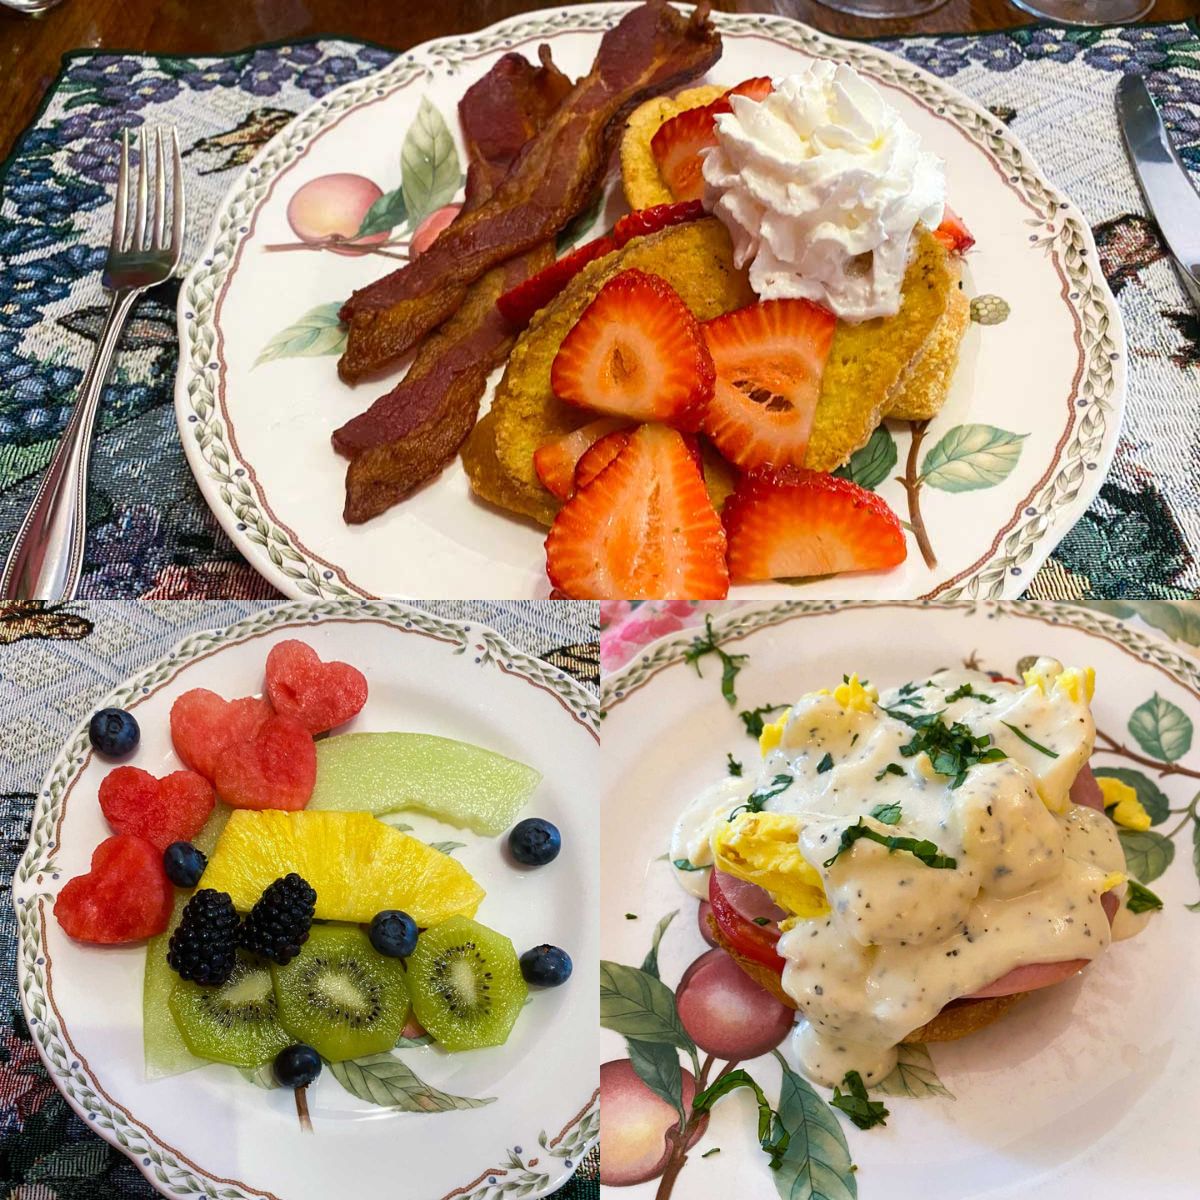 A photo collage of some of the breakfast items served.